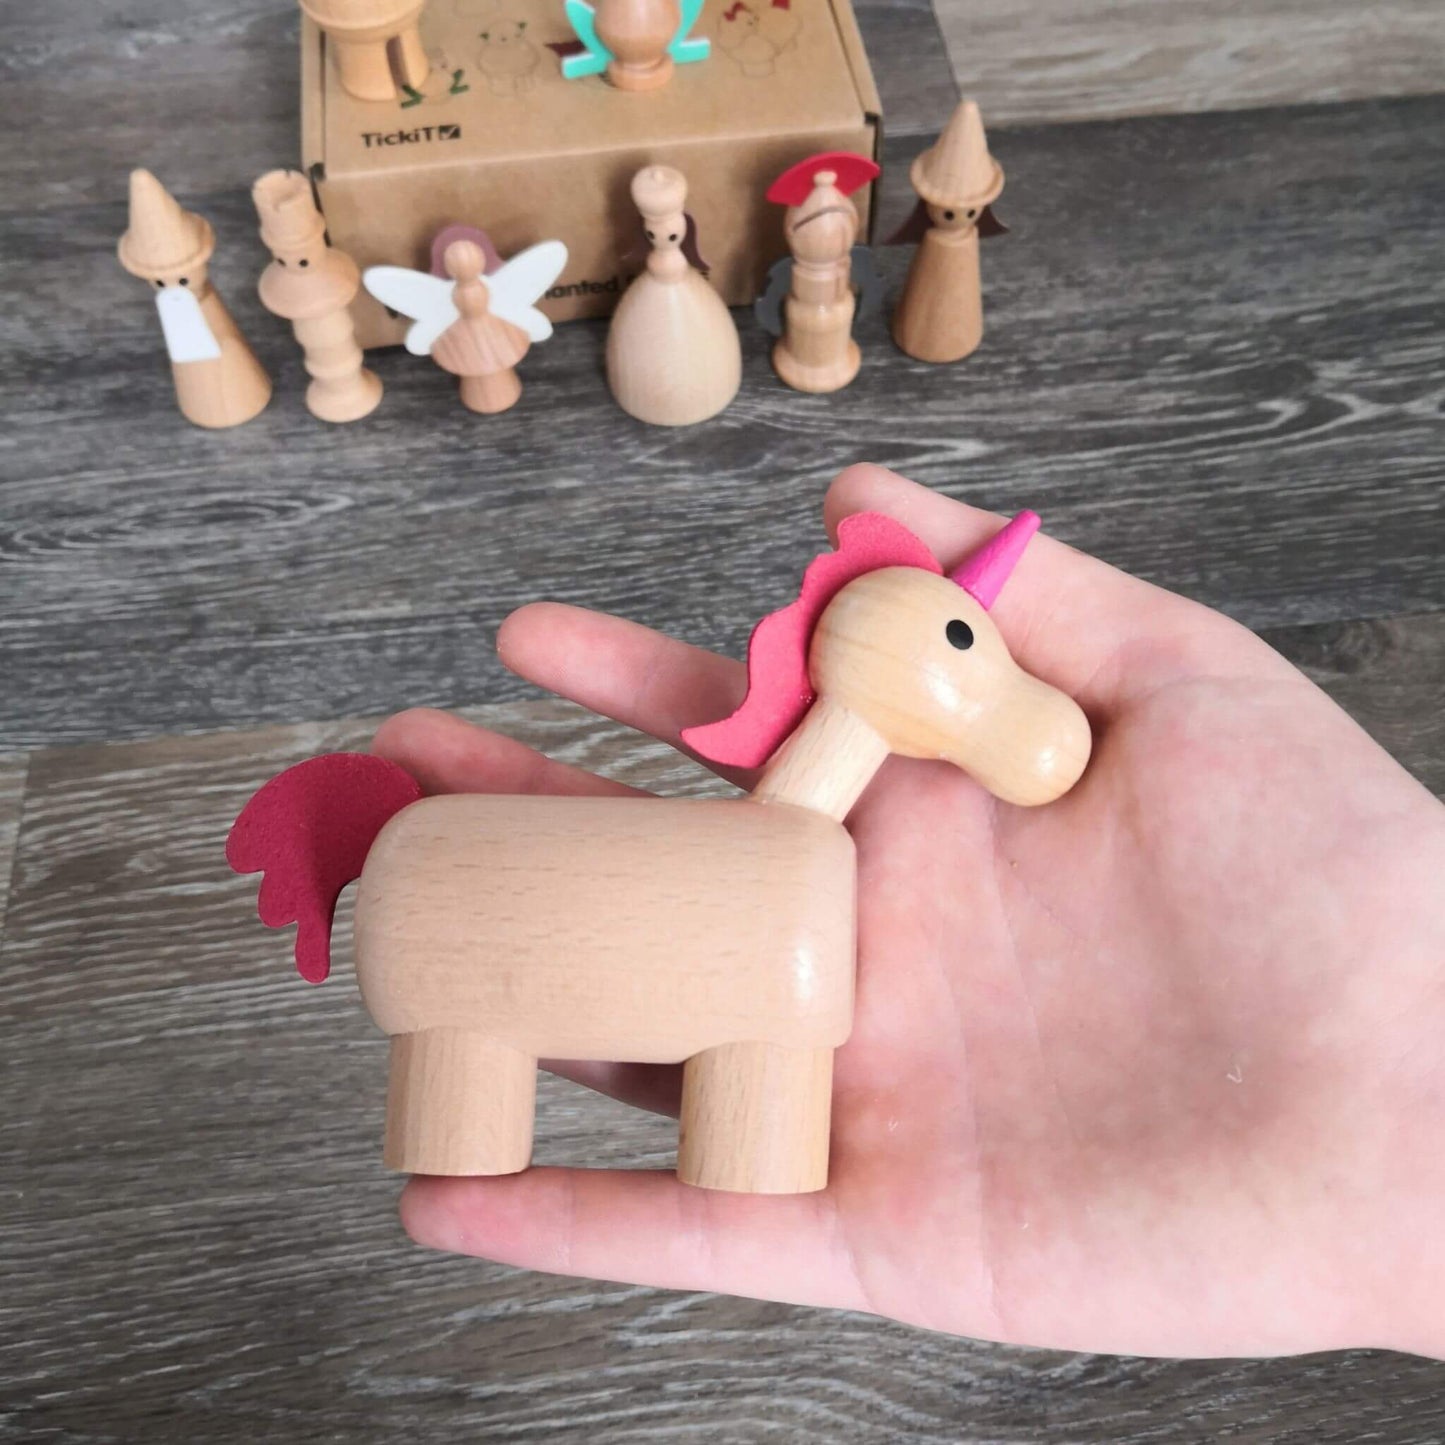 Wooden enchanted figures - Small world play